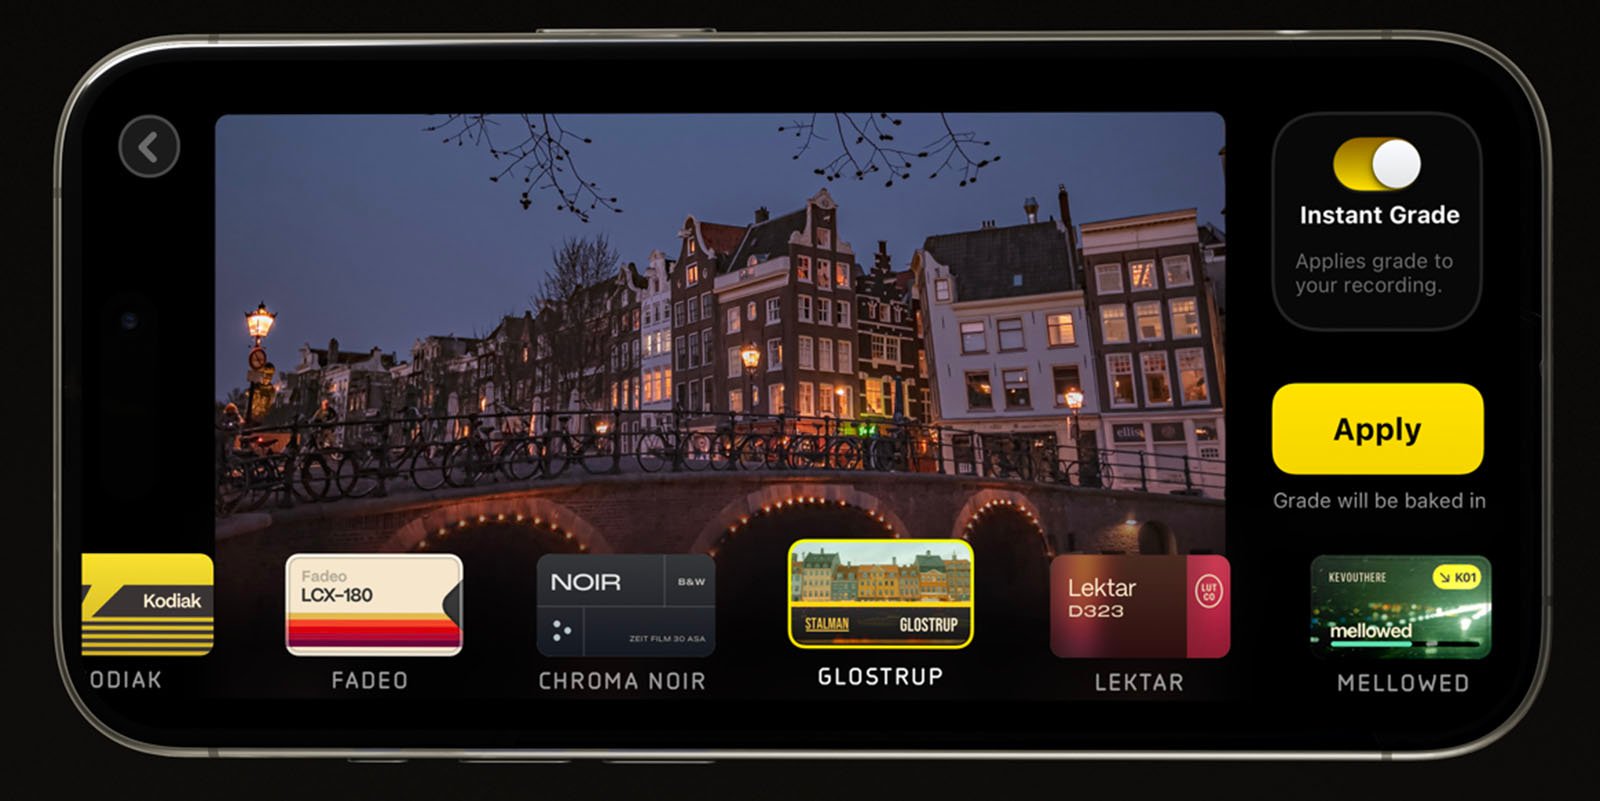 A smartphone screen displays a photo editing app with a picture of a canal and buildings at dusk. Various filter options are visible below the image, including Kodinek, Fadeo, Chroma Noir, Glostrup, Lektar, and Mellowed. An "Instant Grade" toggle switch and "Apply" button are on the right.